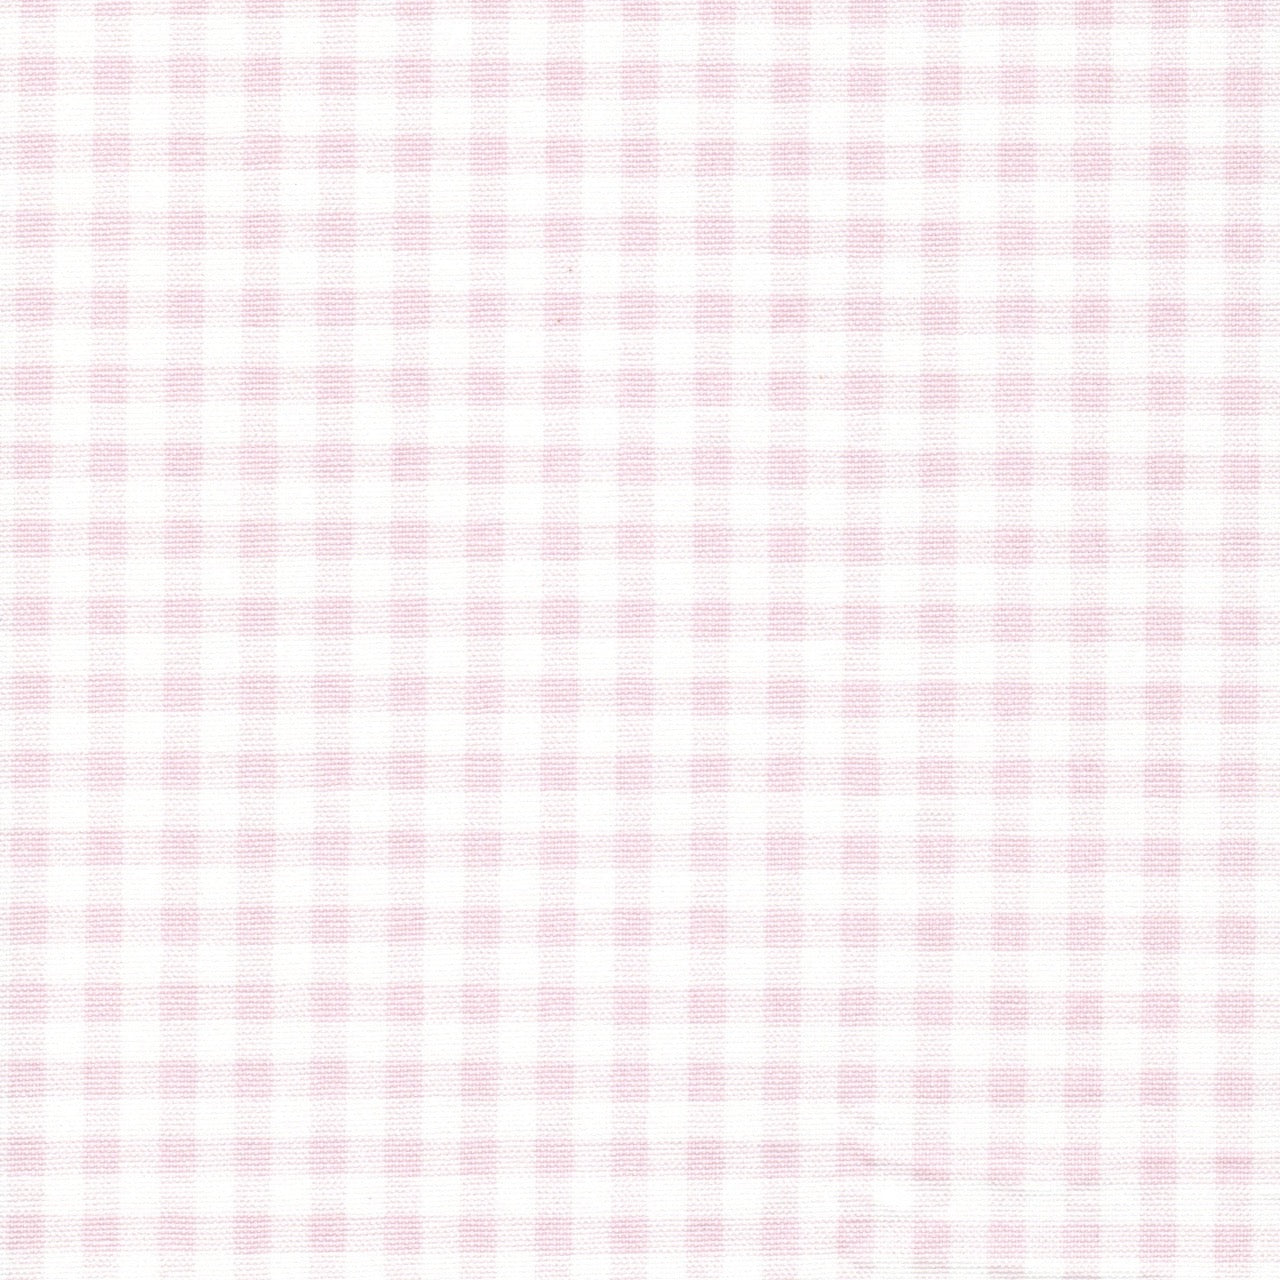 Duvet Cover in Bella Pink Large Gingham Check on White